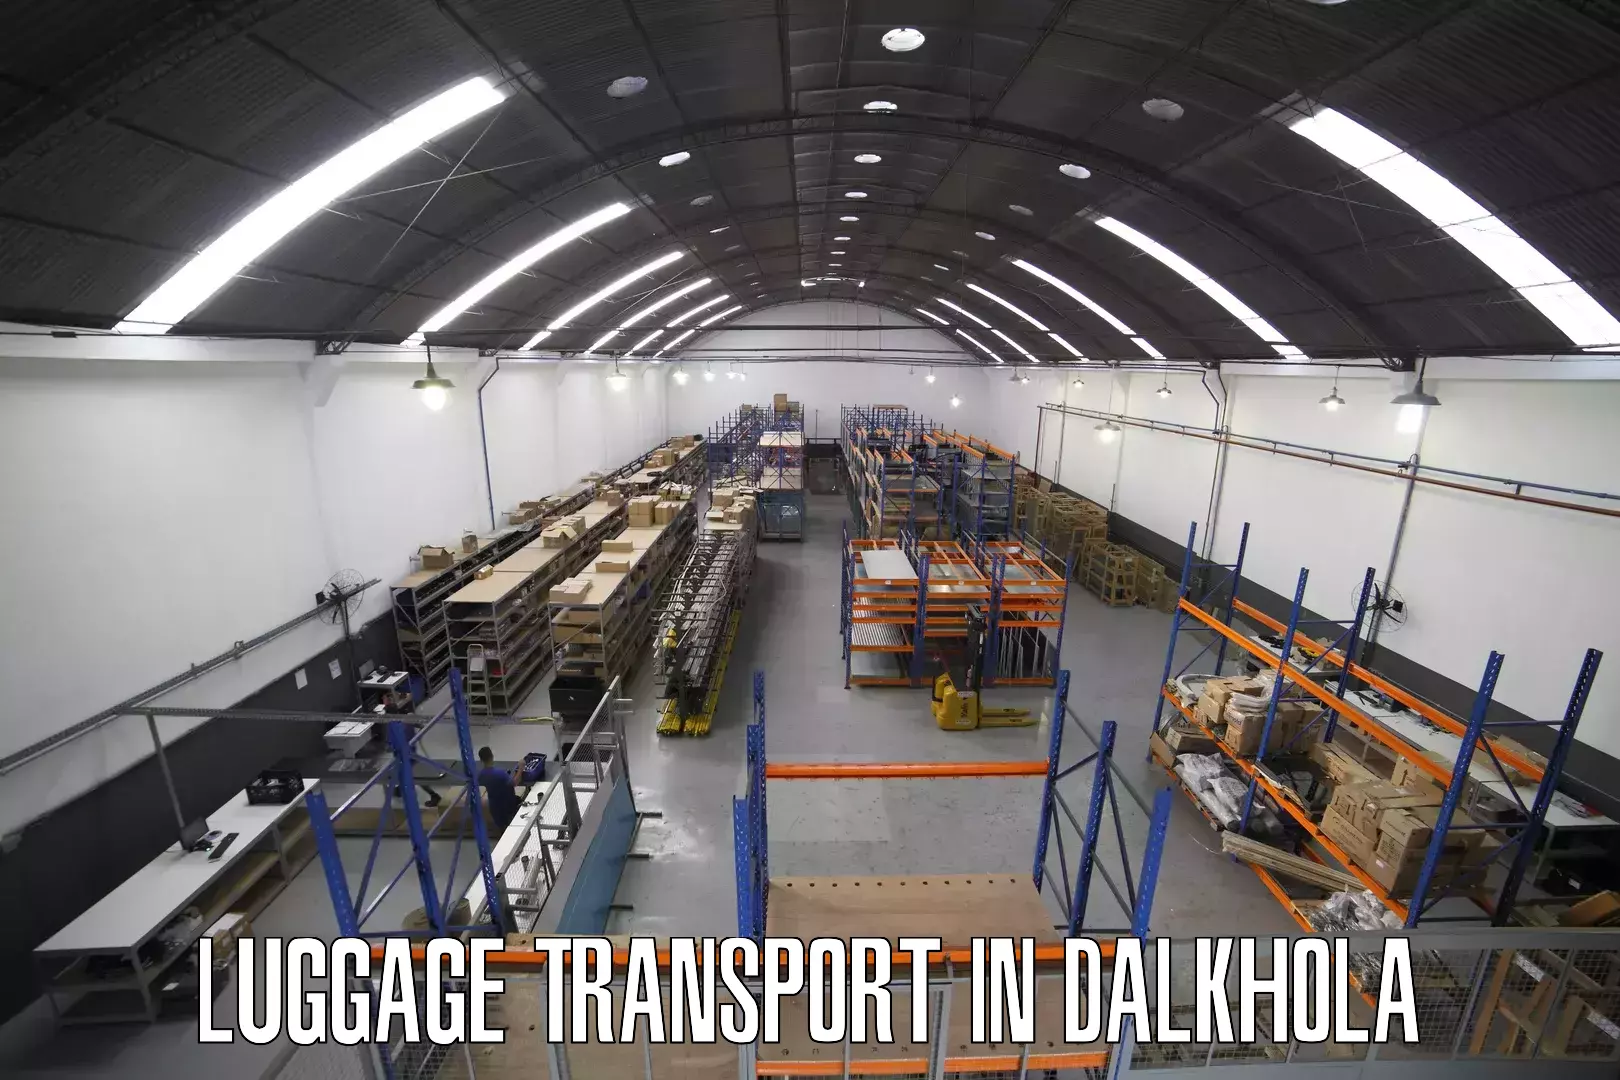 Luggage shipment specialists in Dalkhola